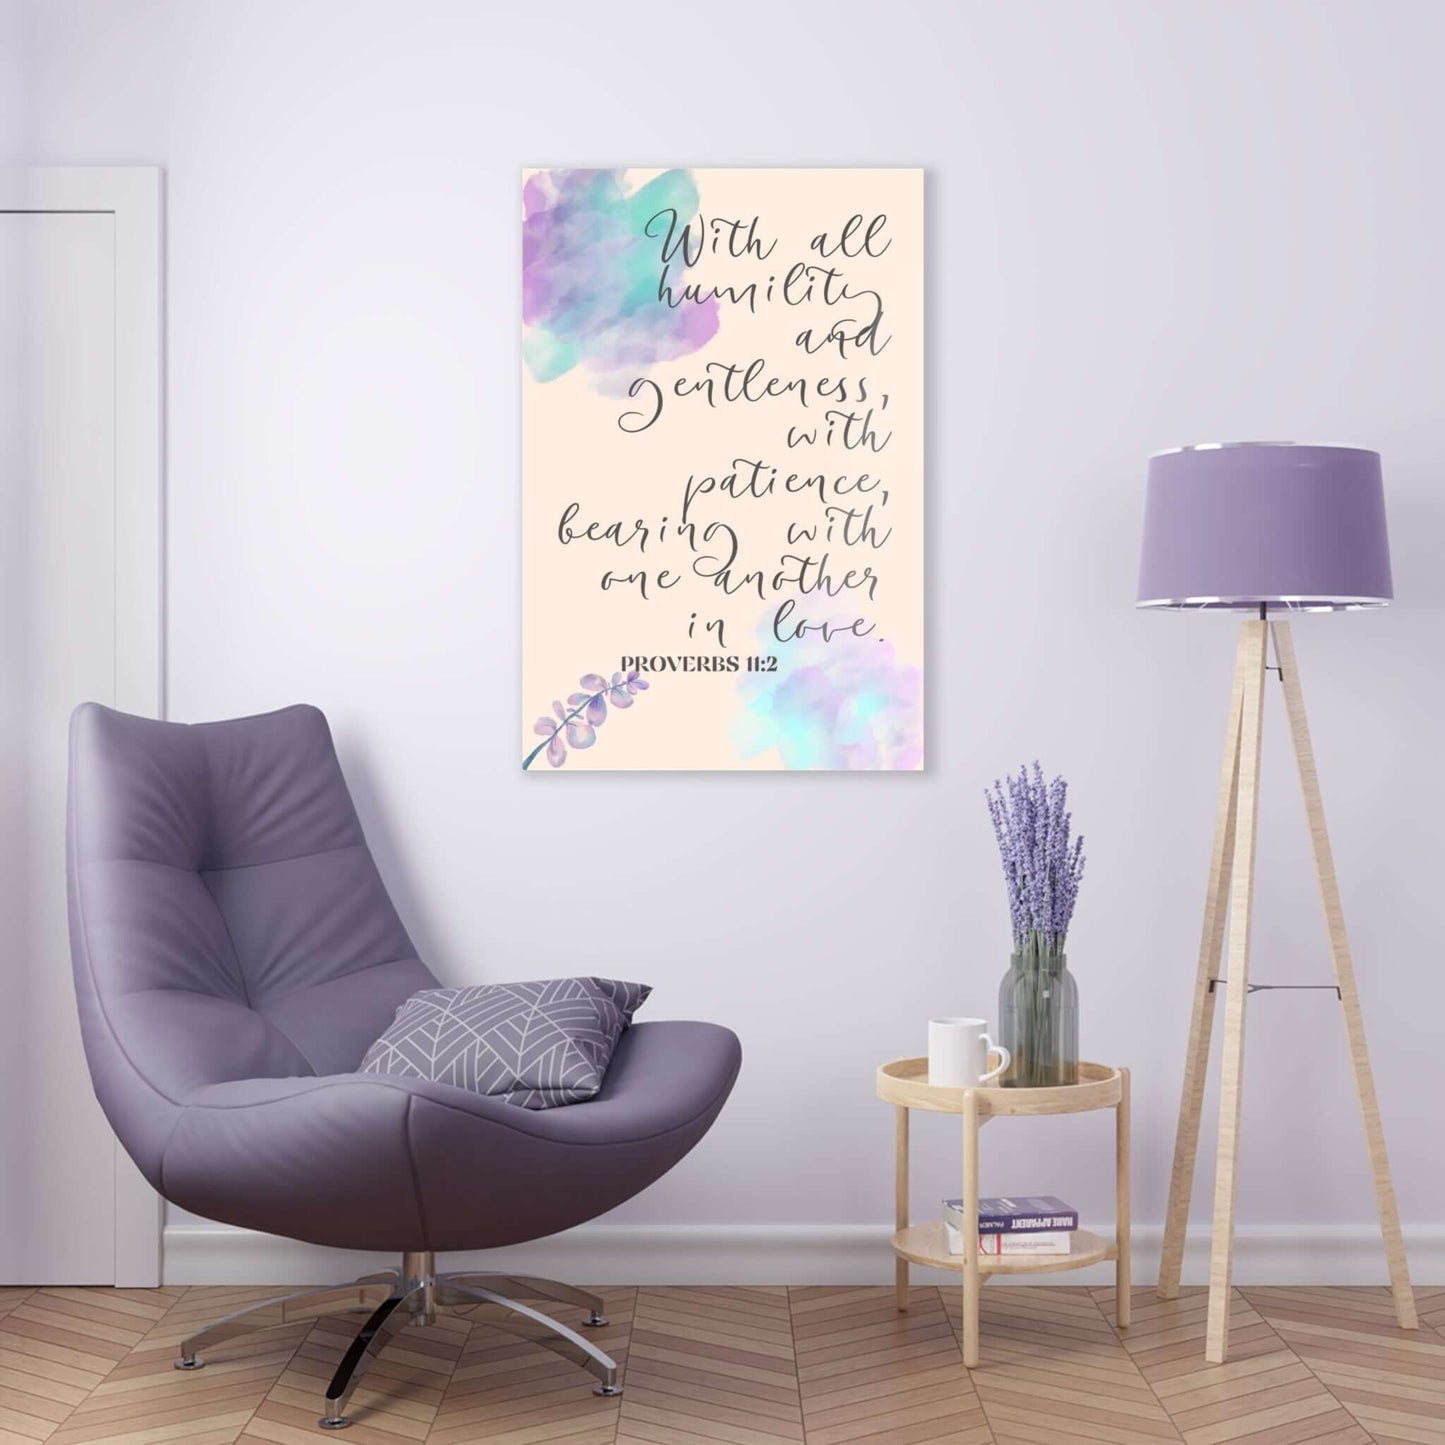 Elegant Game Room Wall Decor: "Humility and Gentleness" Acrylic Print | Art & Wall Decor,Assembled in the USA,Assembled in USA,Decor,Home & Living,Home Decor,Indoor,Made in the USA,Made in USA,Poster